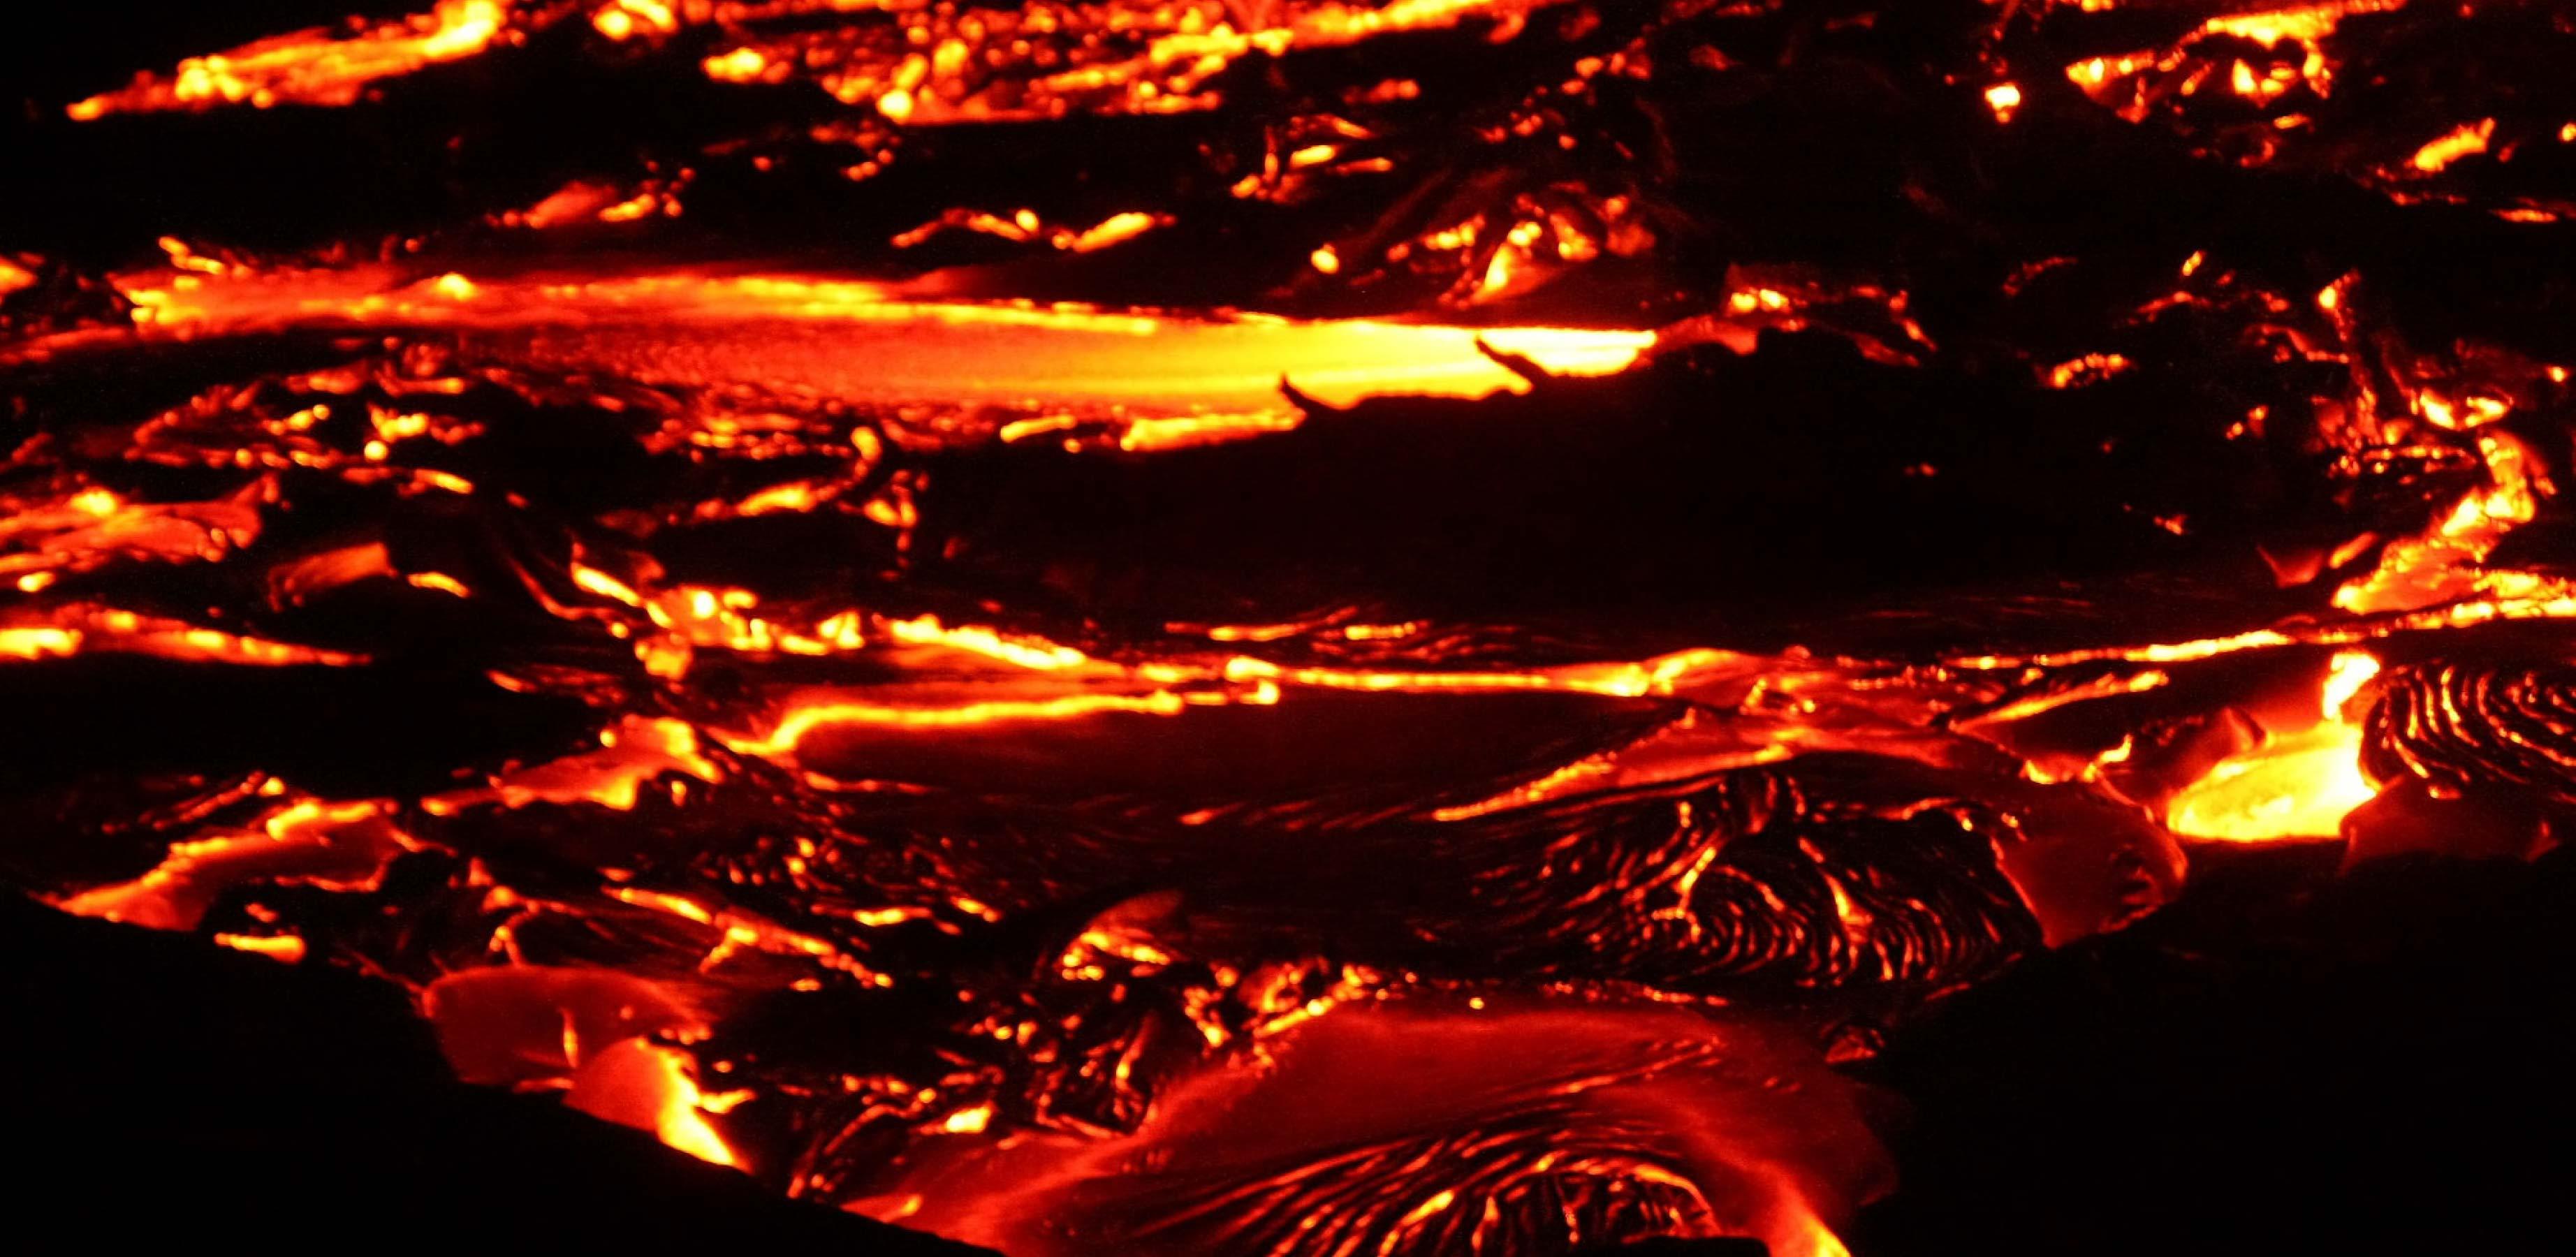 Photo of incandescent lava flow taken at night.